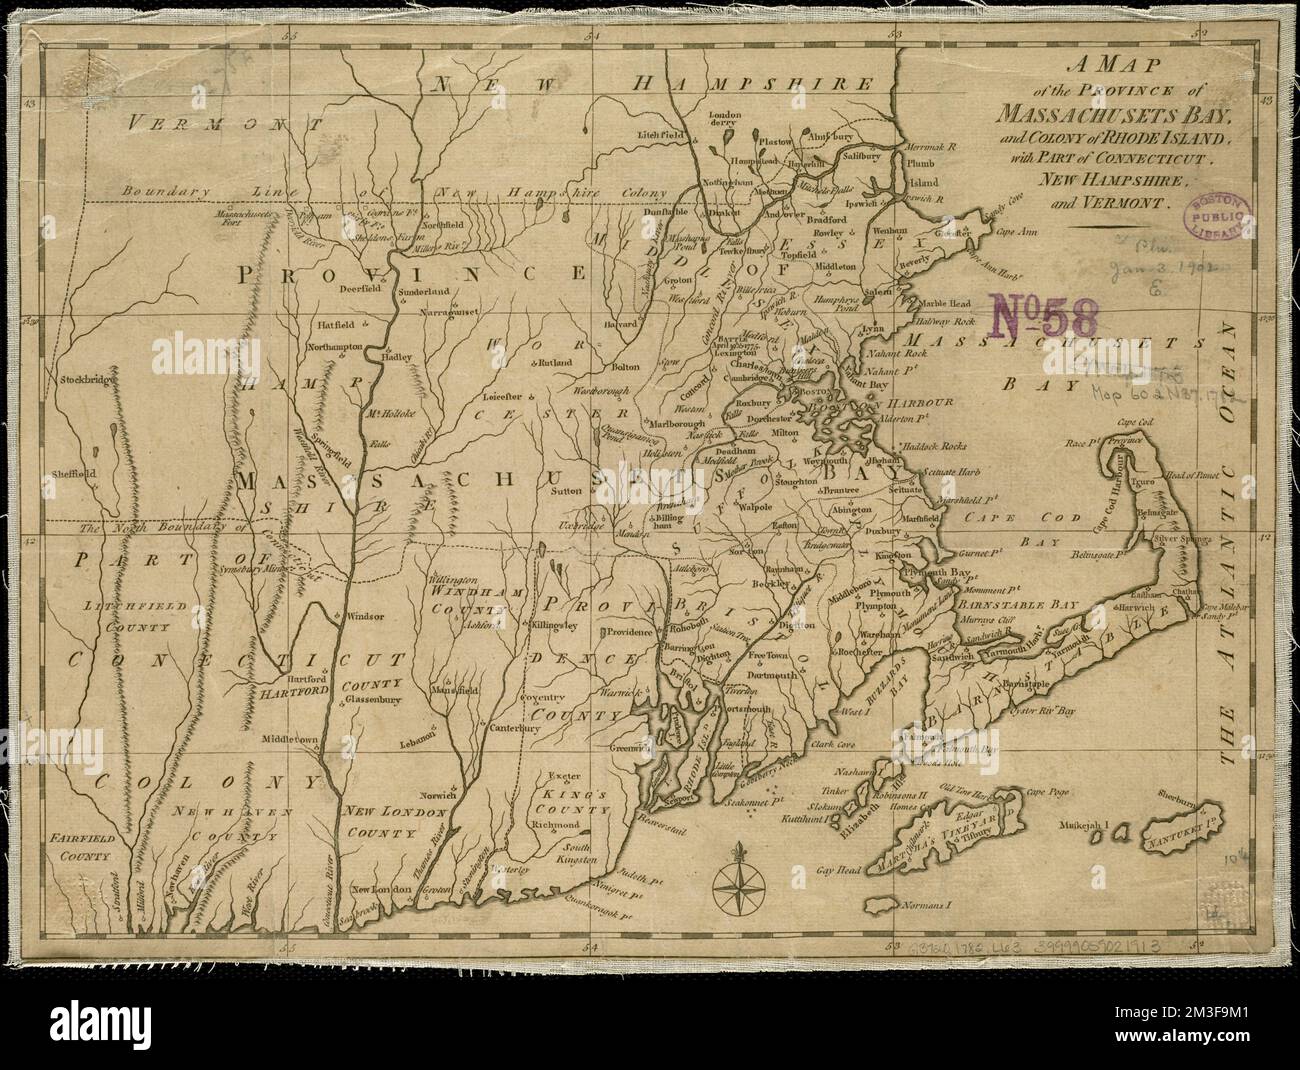 A map of the province of Massachusets Bay and colony of Rhode Island, with part of Connecticut, New Hampshire, and Vermont , Massachusetts, Maps, Early works to 1800, Rhode Island, Maps, Early works to 1800, Connecticut, Maps, Early works to 1800 Norman B. Leventhal Map Center Collection Stock Photo